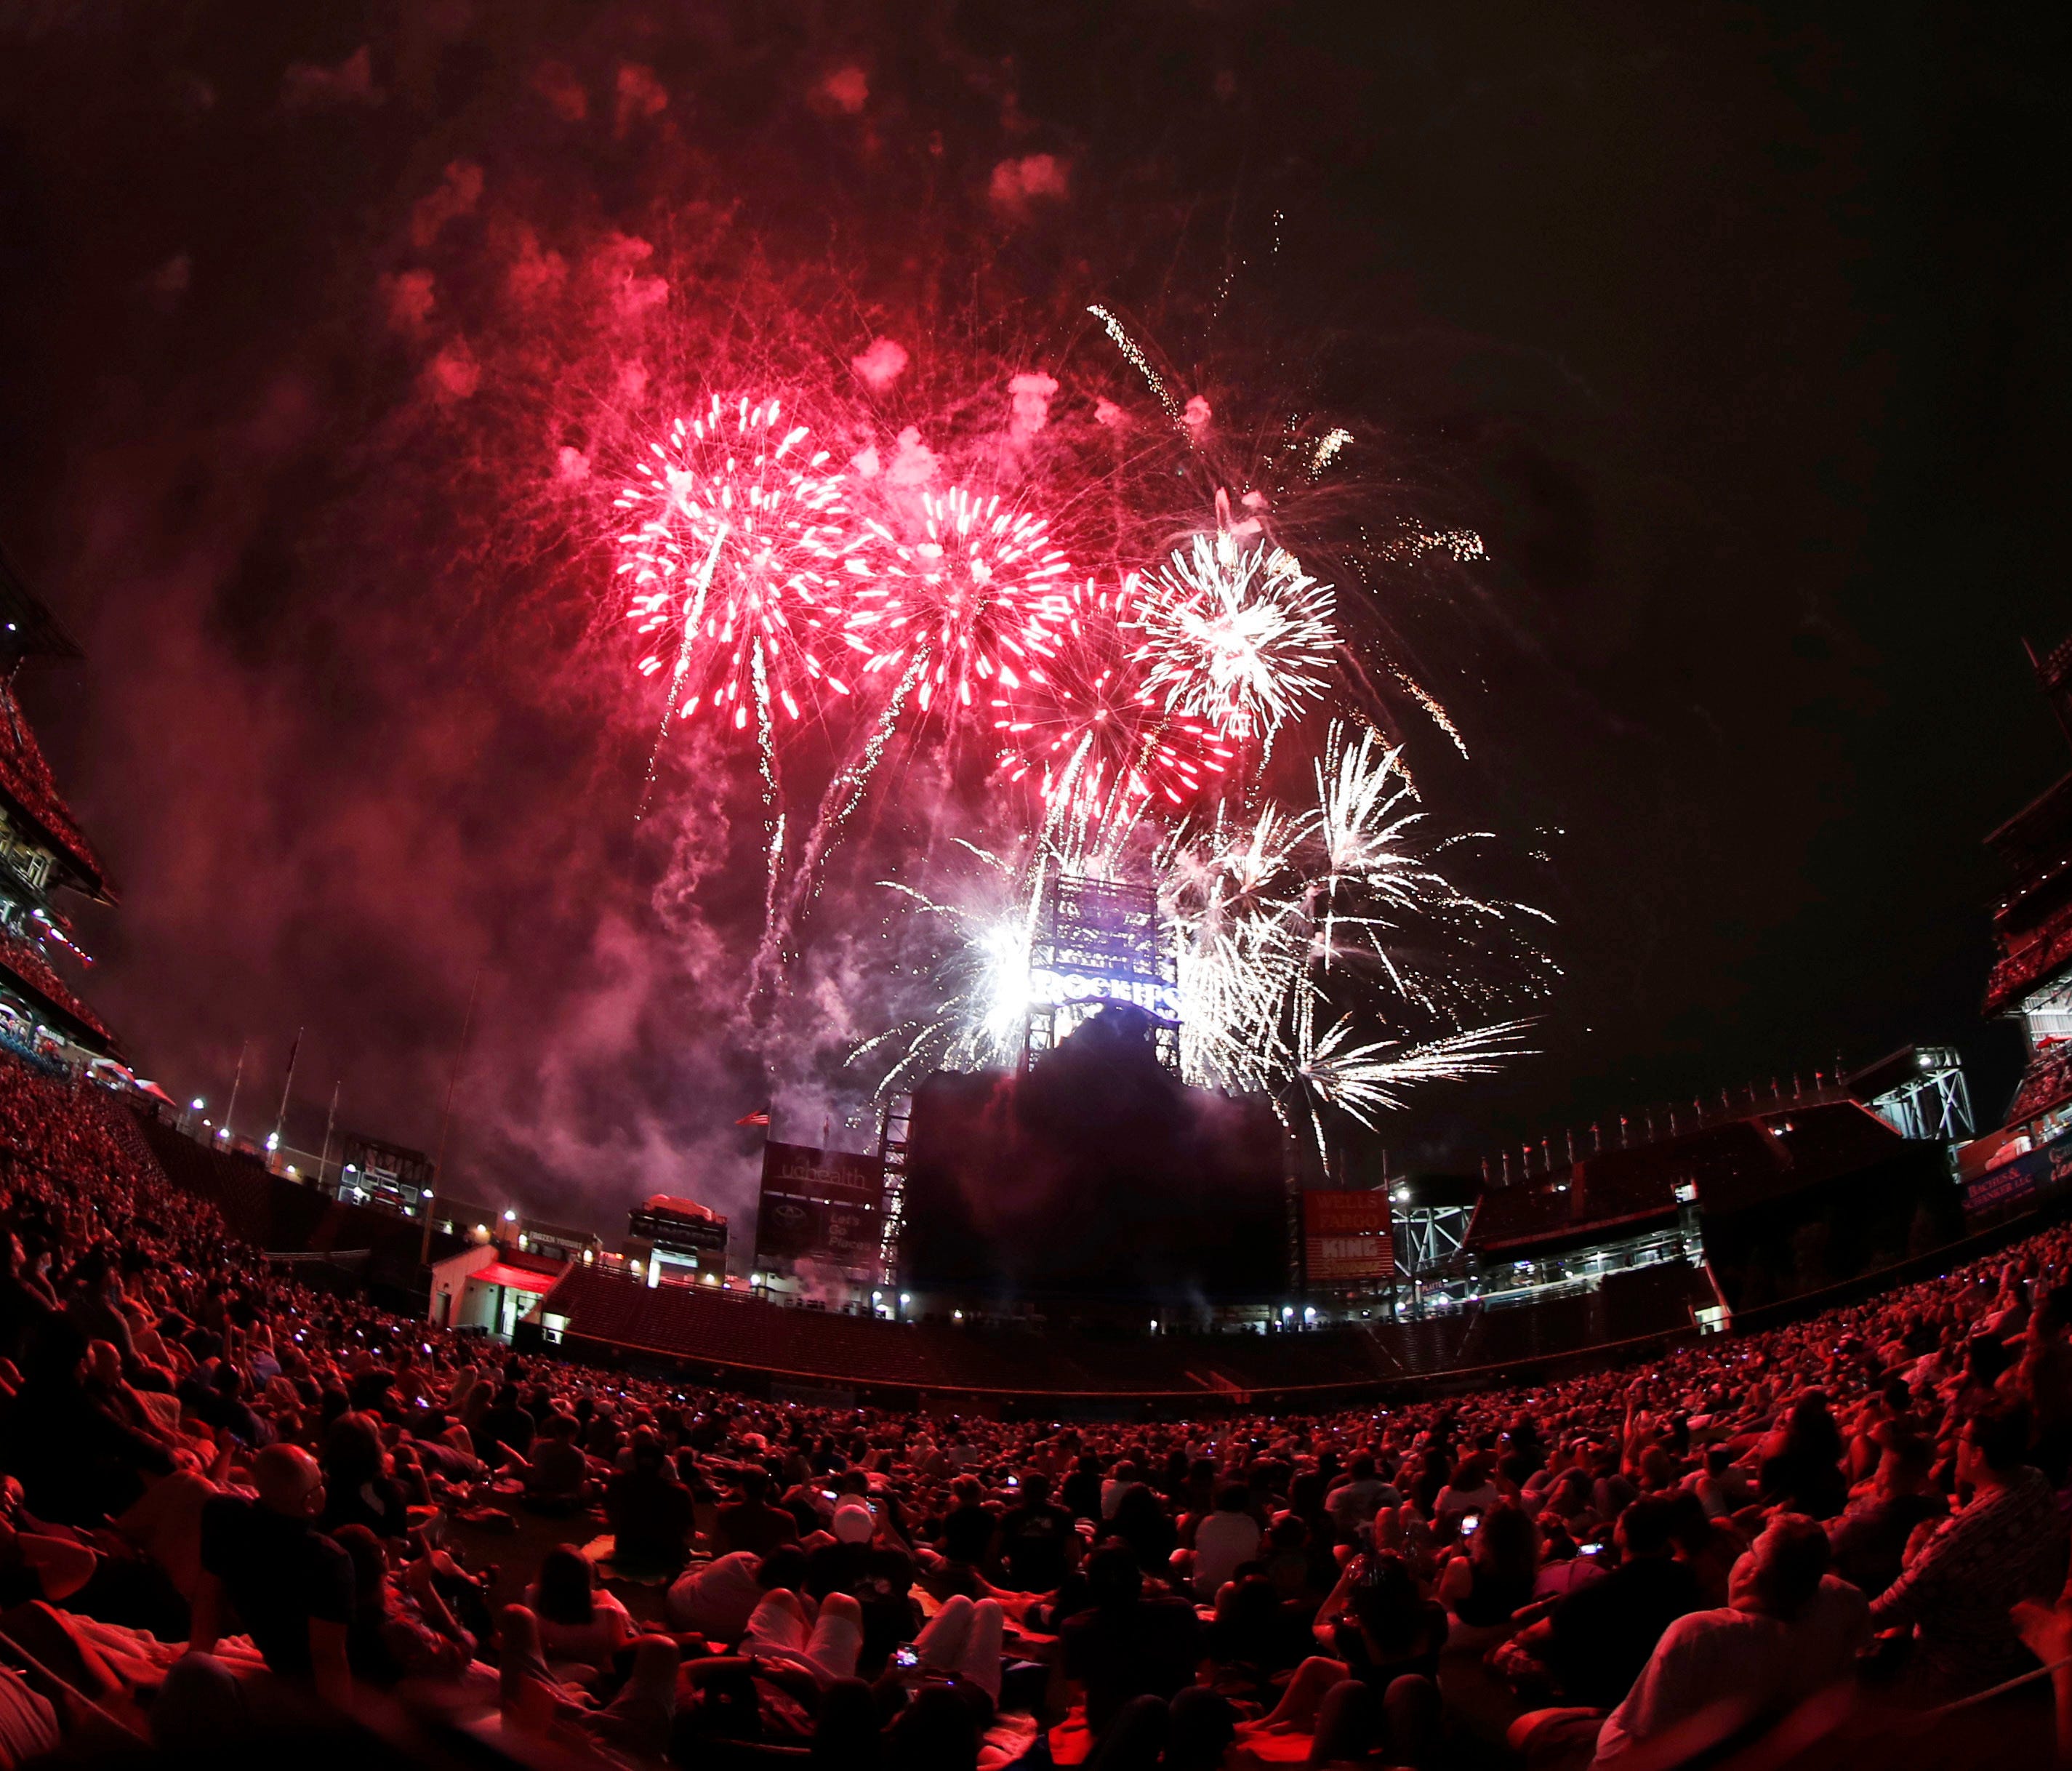 Fireworks to mark the Fourth of July holiday explode as fans sit on the outfield grass of Coors Field after a baseball game Tuesday in Denver.